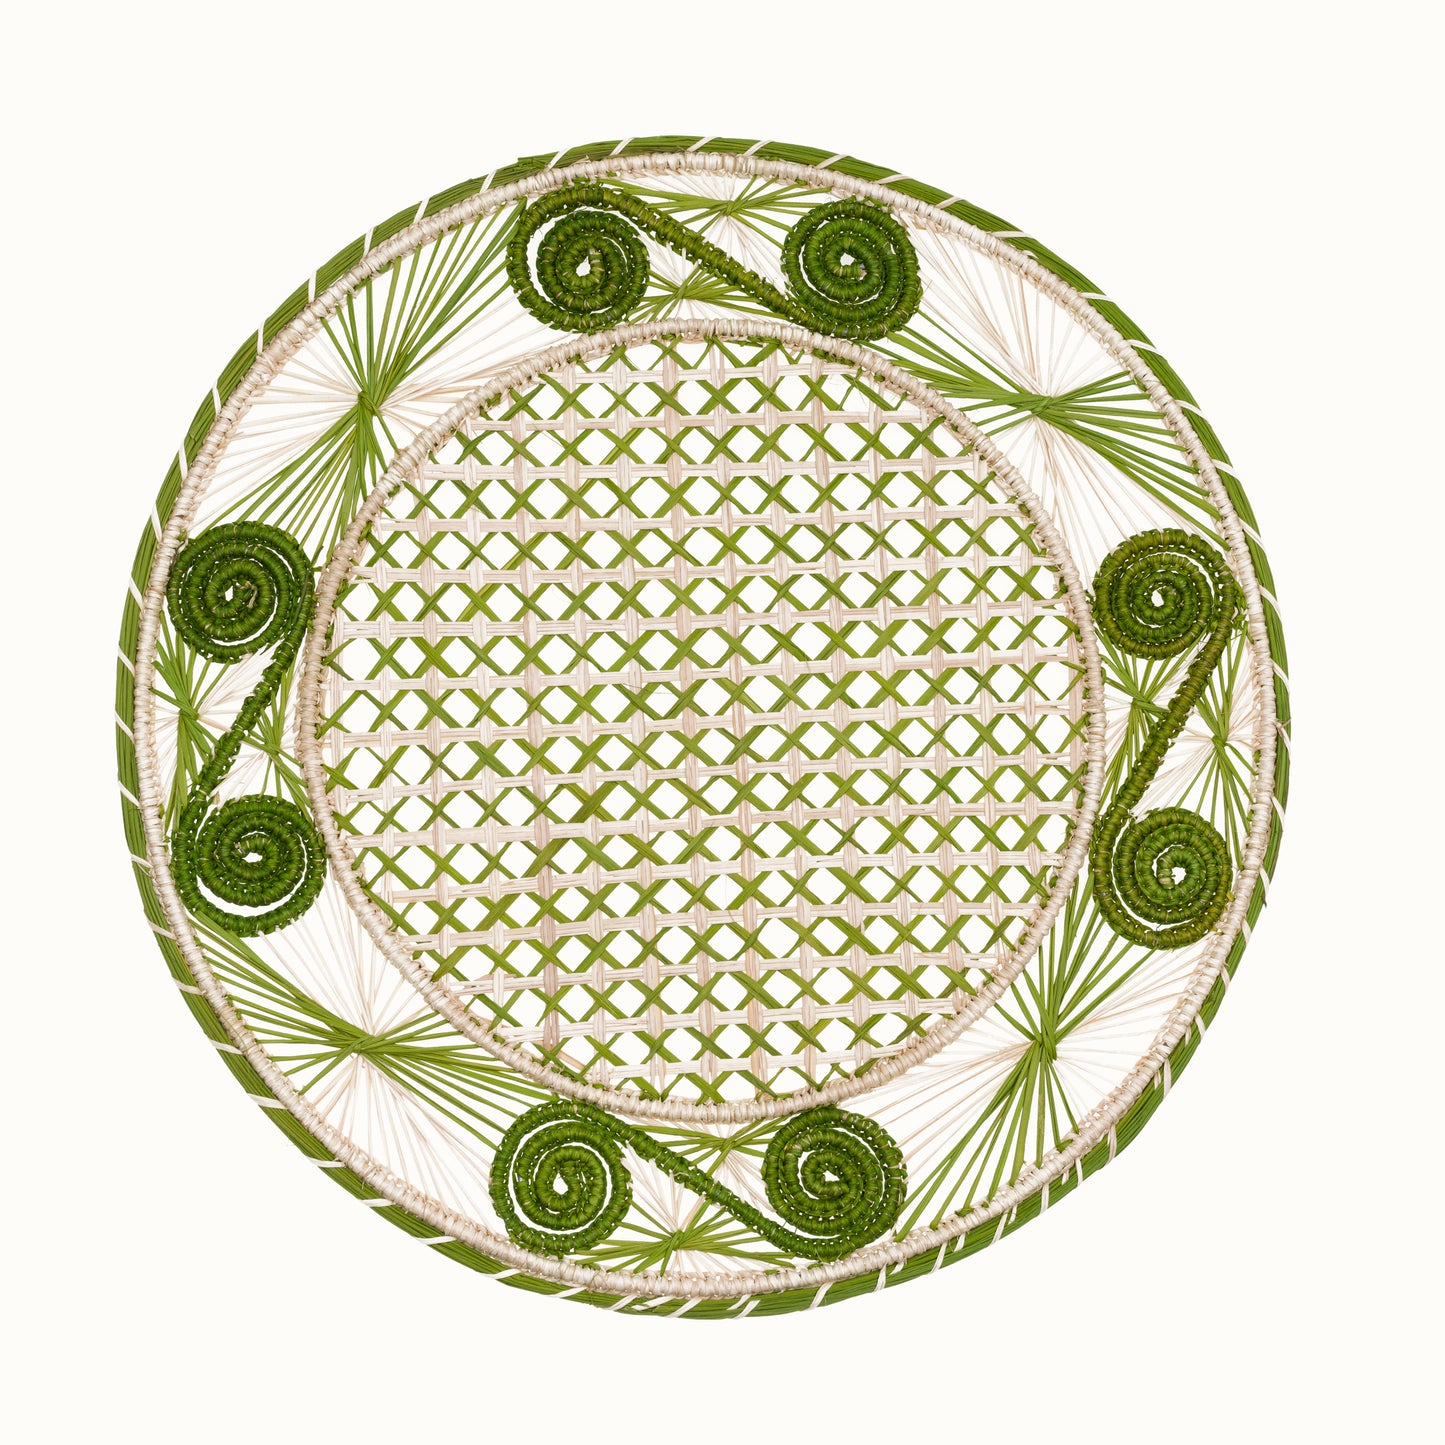 Iraca olive green and natural placemat